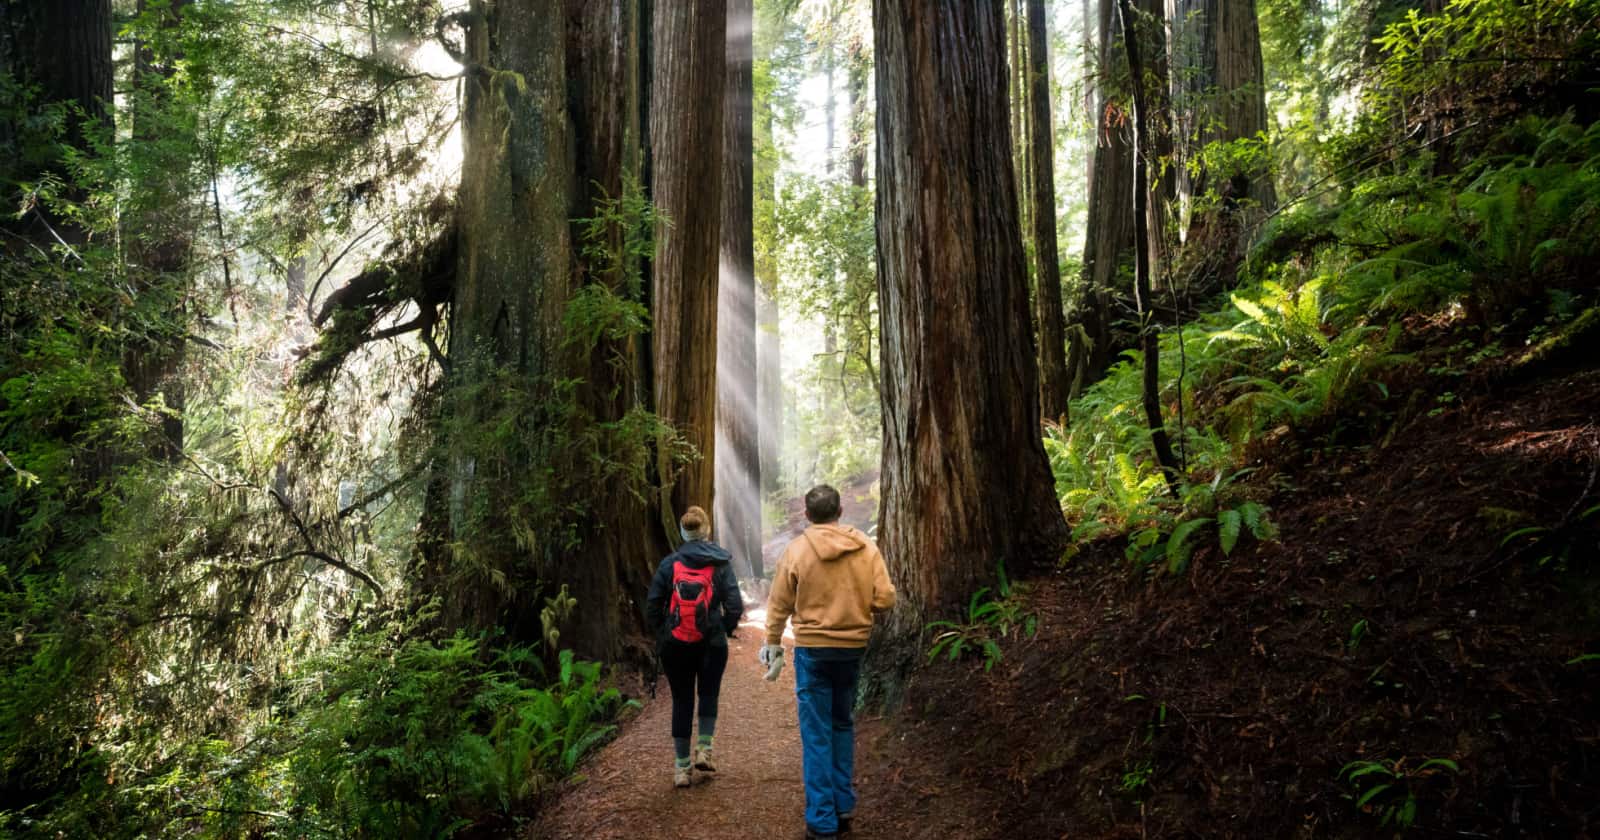 Two adventurers wander the misty heart of the Redwood giants.